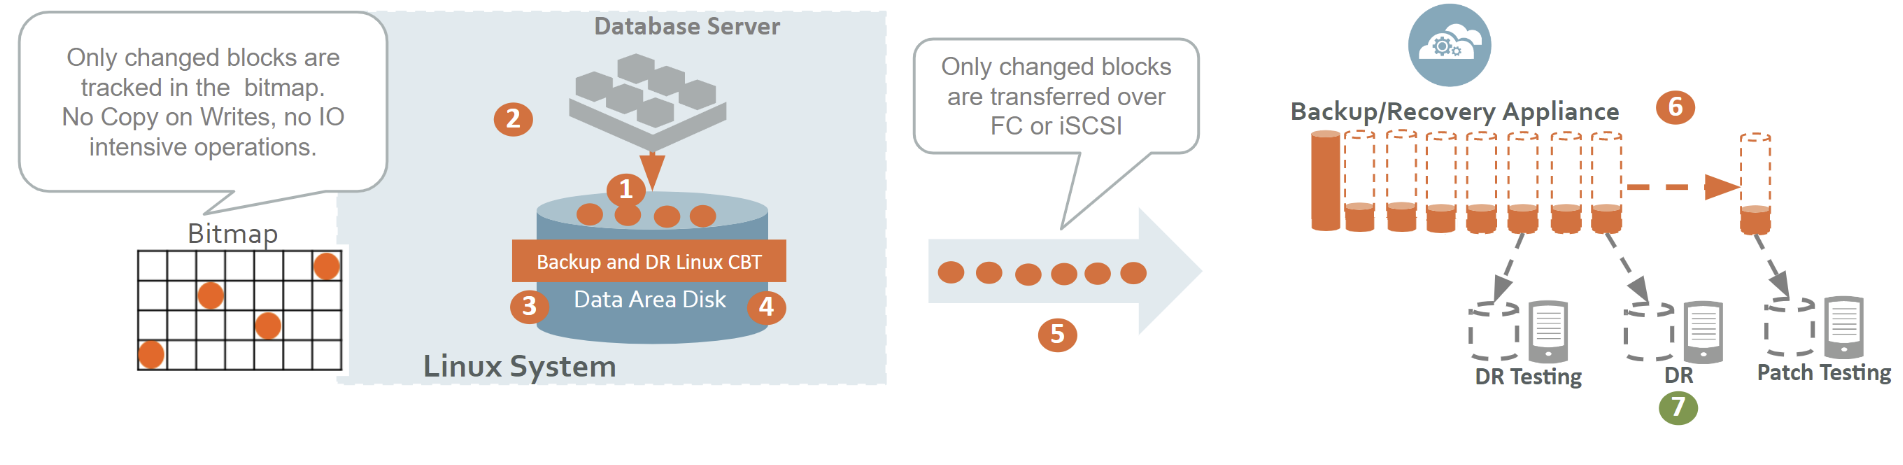 How it works: SAP ASE volume-based backup with change block tracking.